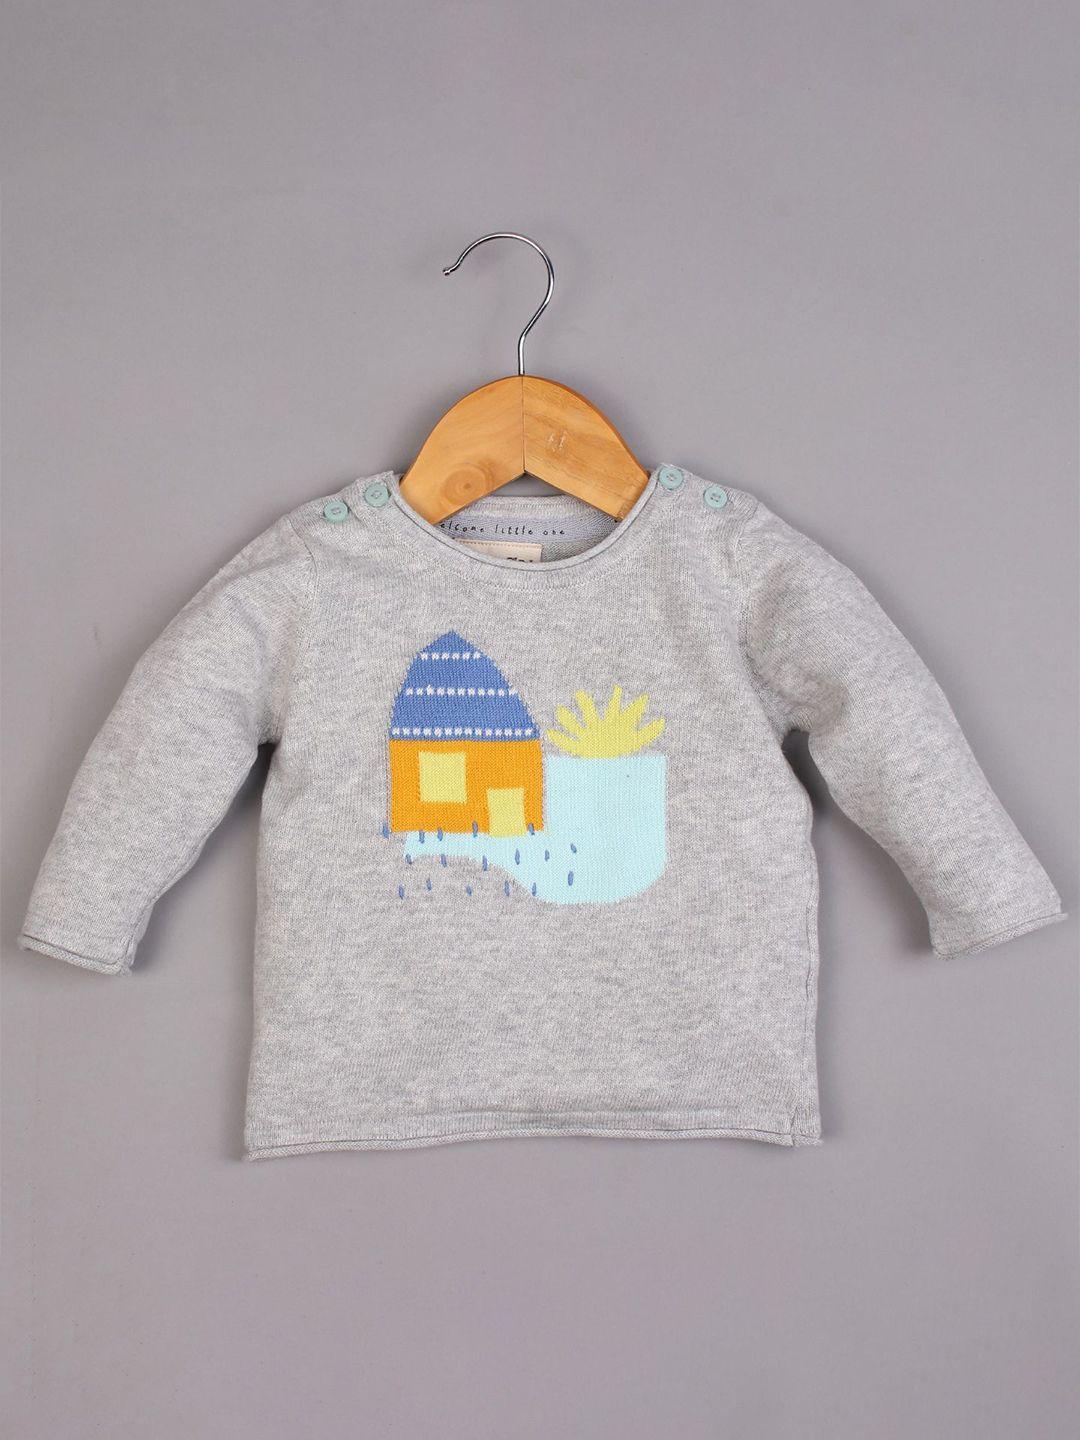 baesd boys grey & blue embroidered woollen pullover with embroidered detail